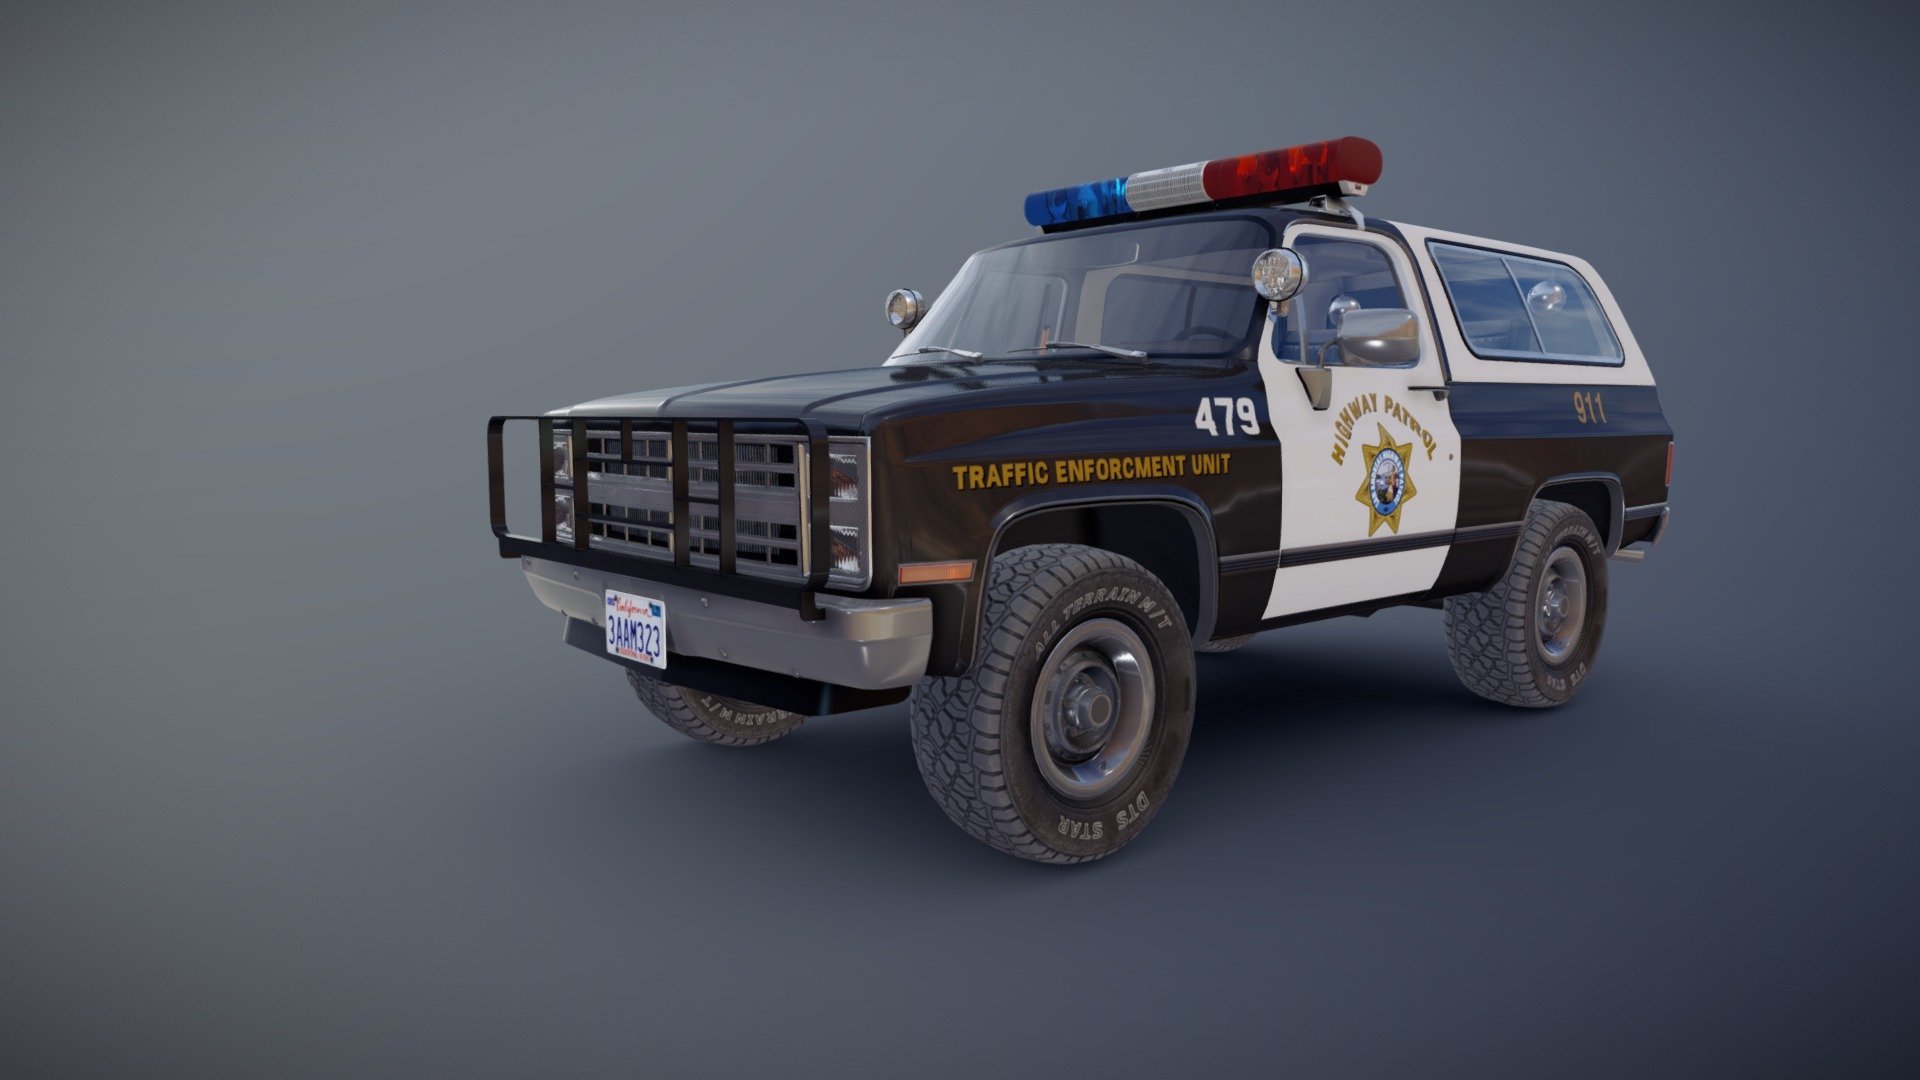 High accuracy 80s Police offroad car model.

Midpoly exterior.

Lowpoly interior(1024x1024 diffuse texture).

Low poly wheels with PBR textures(2048x2048).

Full model - 58355 tris 34363 verts

Lowpoly interior - 3625 tris 2147 verts

Wheels - 10952 tris 6180 verts

Original scale

Length - 4,3m, widht - 1,8m, hieght - 1,85m

Model ready for real-time apps, games, virtual reality and augmented reality.

Asset looks accuracy and realistic and become a good part of your project 3d model